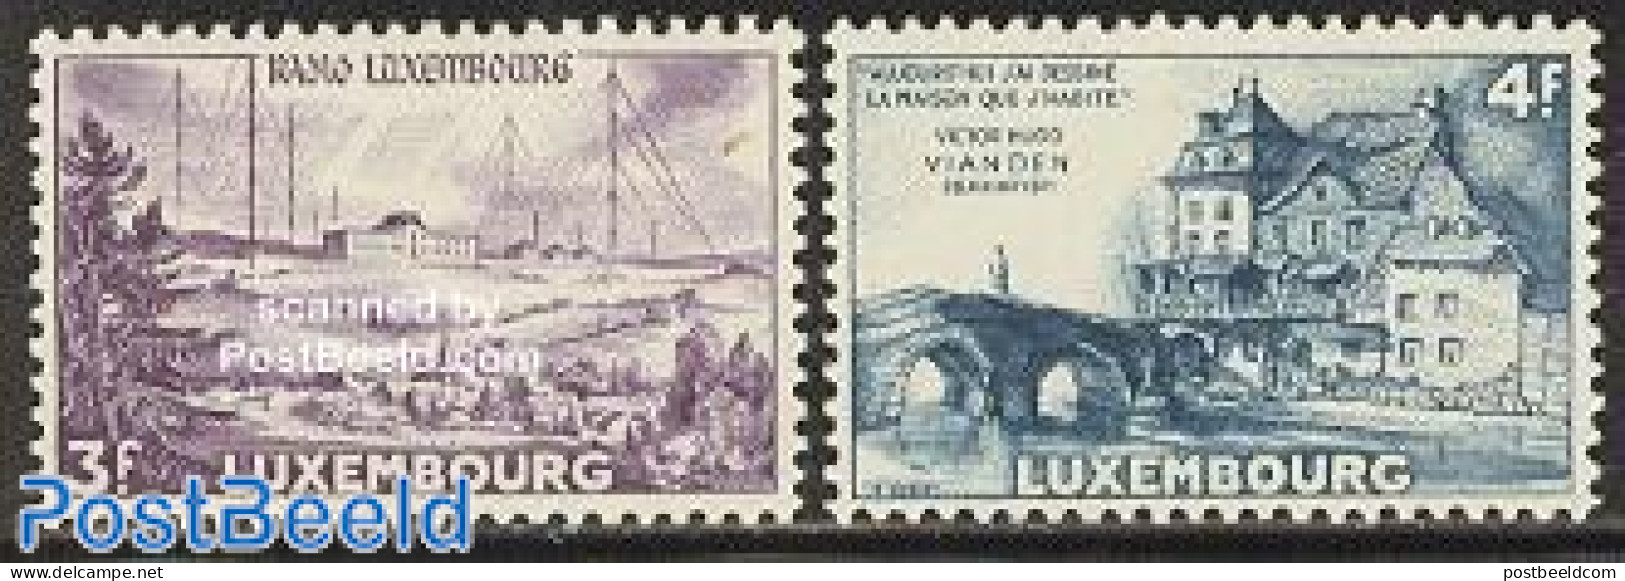 Luxemburg 1953 Definitives 2v, Mint NH, Performance Art - Radio And Television - Art - Authors - Bridges And Tunnels - Ungebraucht